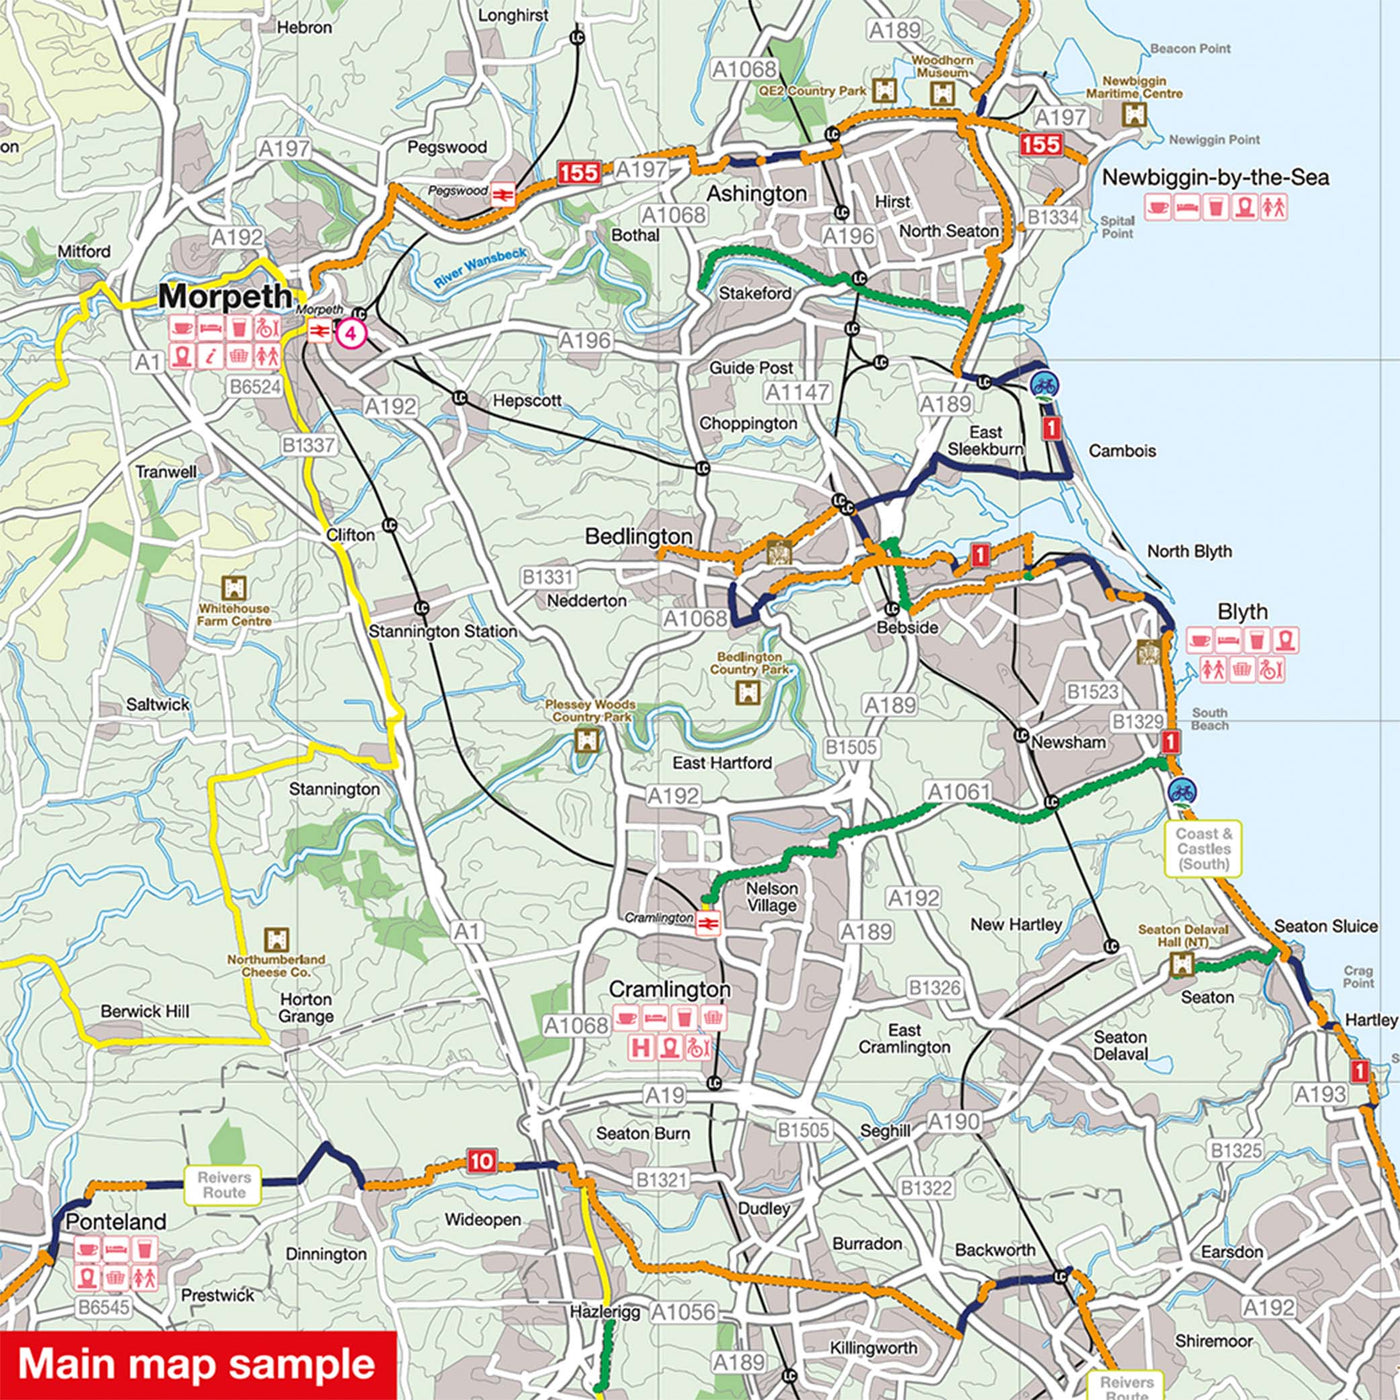 Main map sample for the Tyne and Wear cycle map